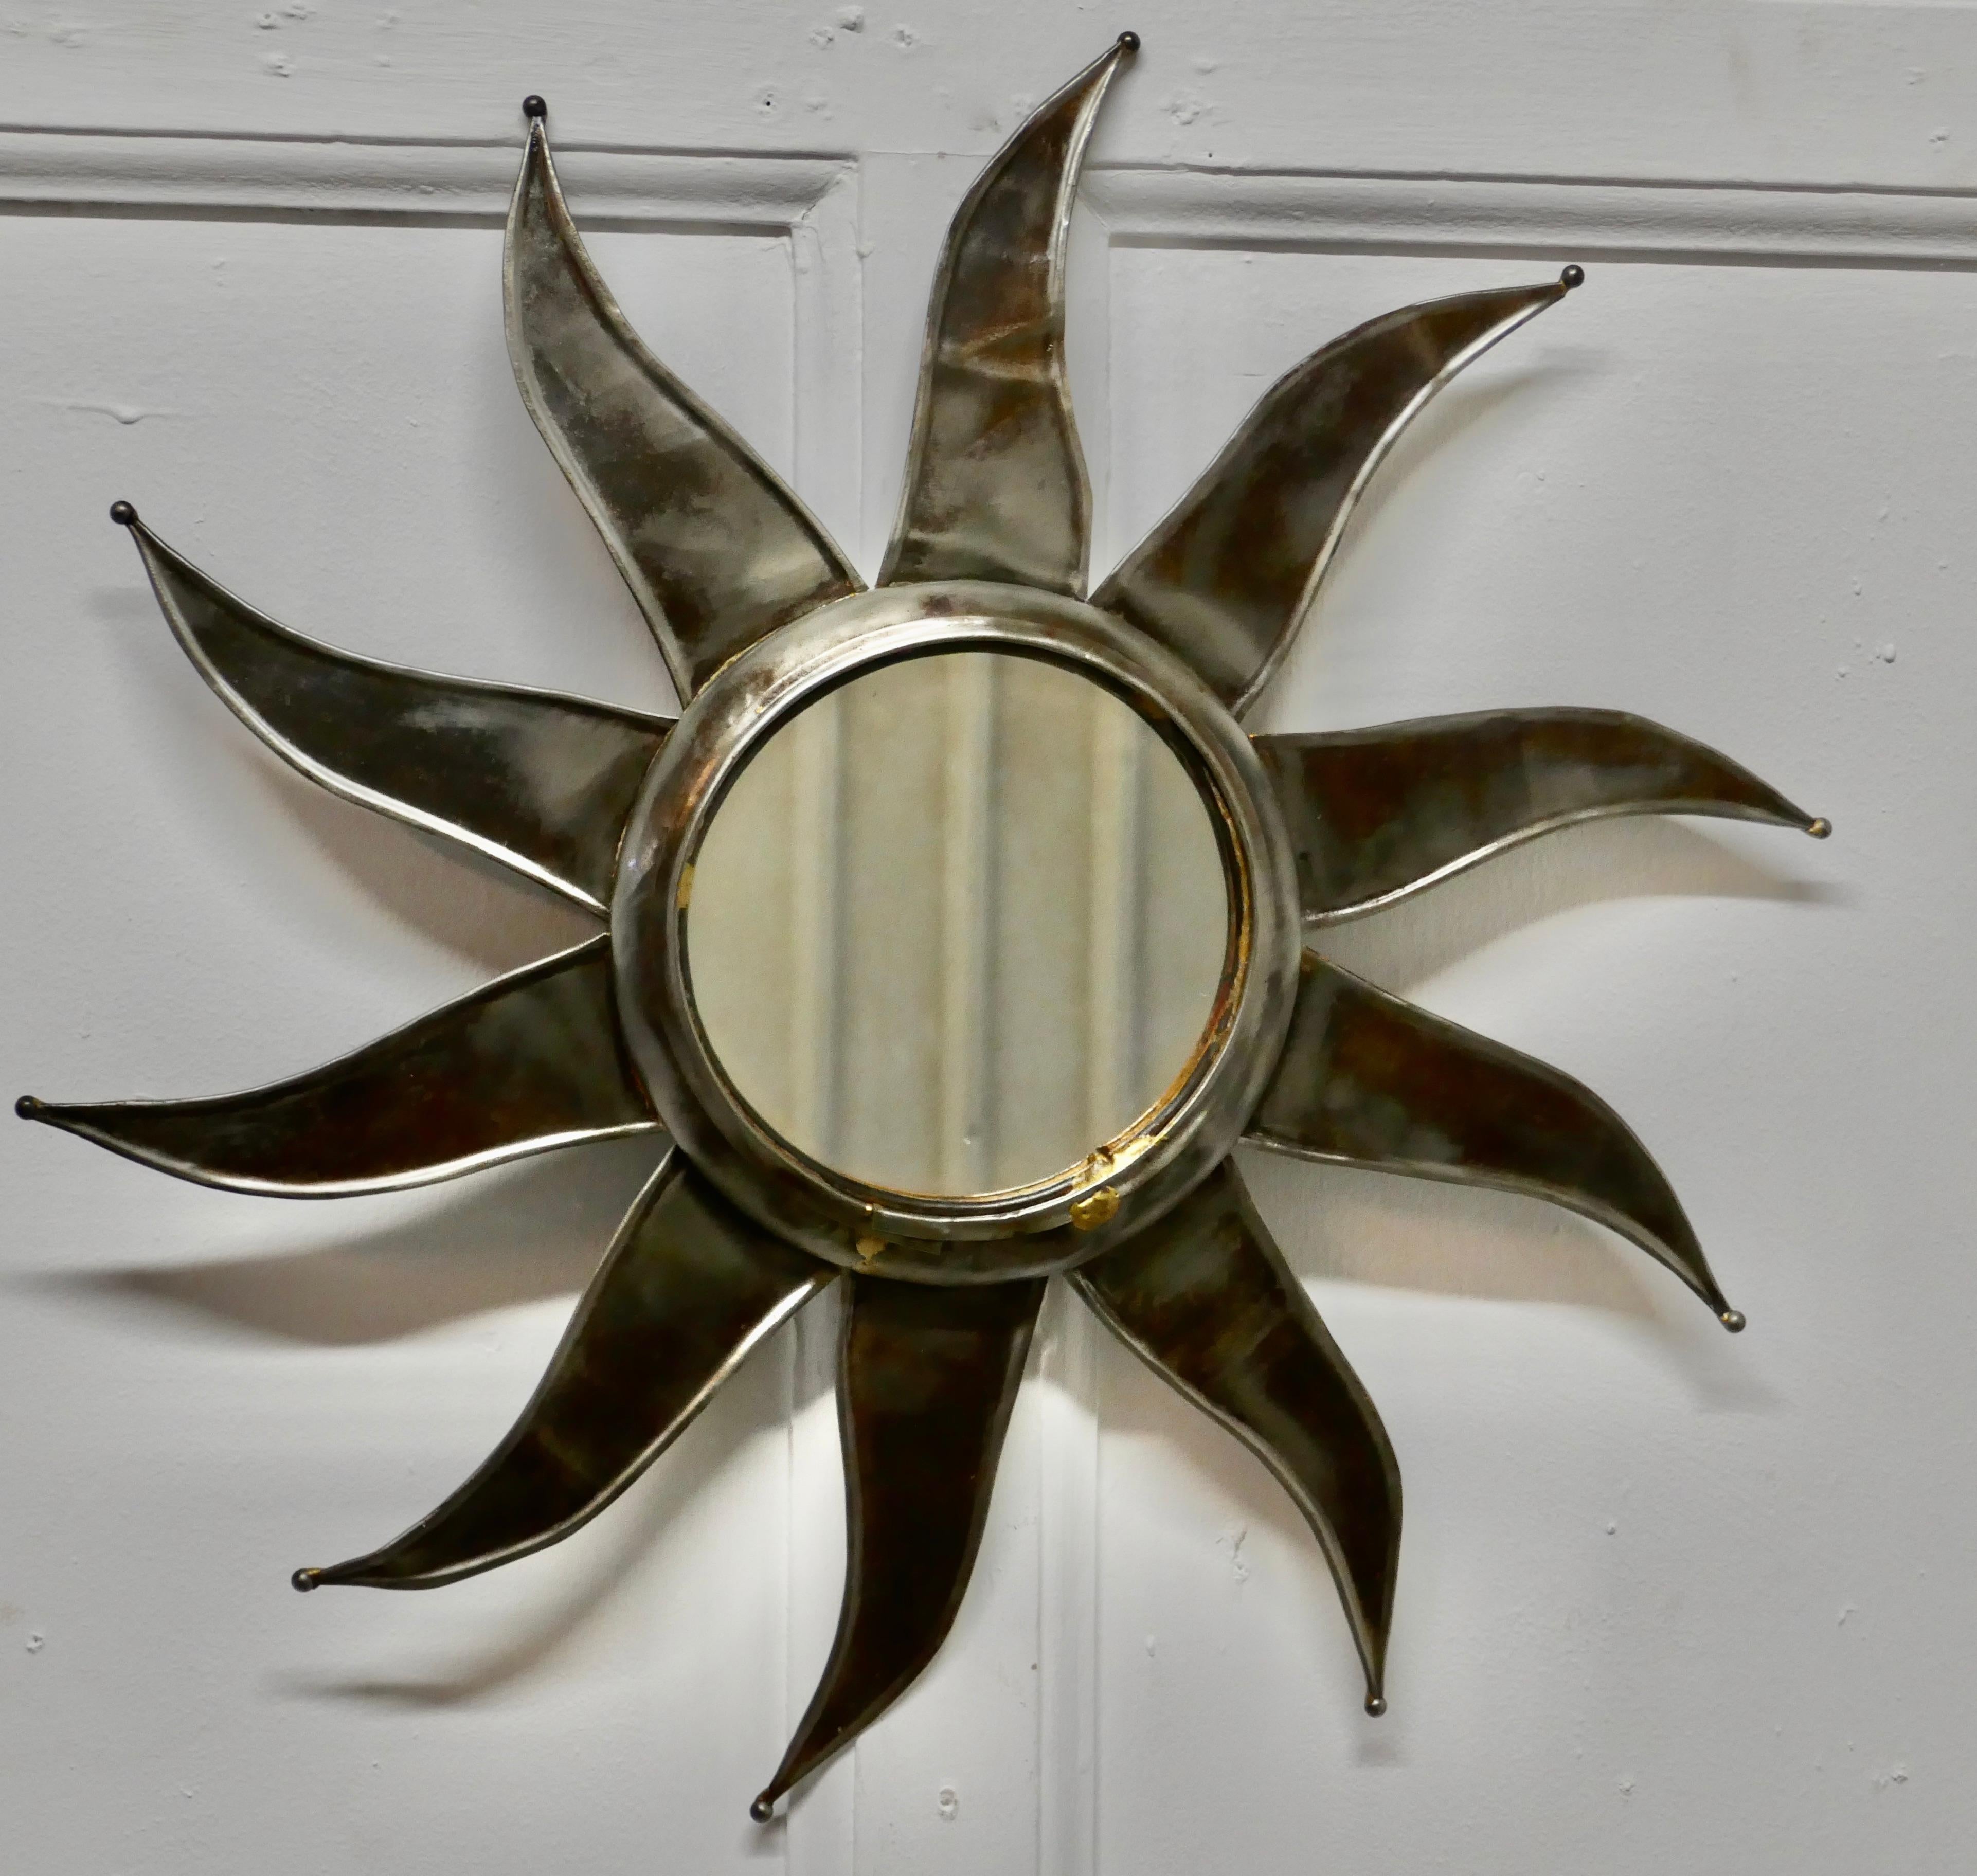 French retro sunburst industrial look polished steel mirror

A superb stylish piece, the starburst radiates out from the central mirror, the rays are slightly wavy in design, they take the form of large flat petals

A Classic from the 1960s era,